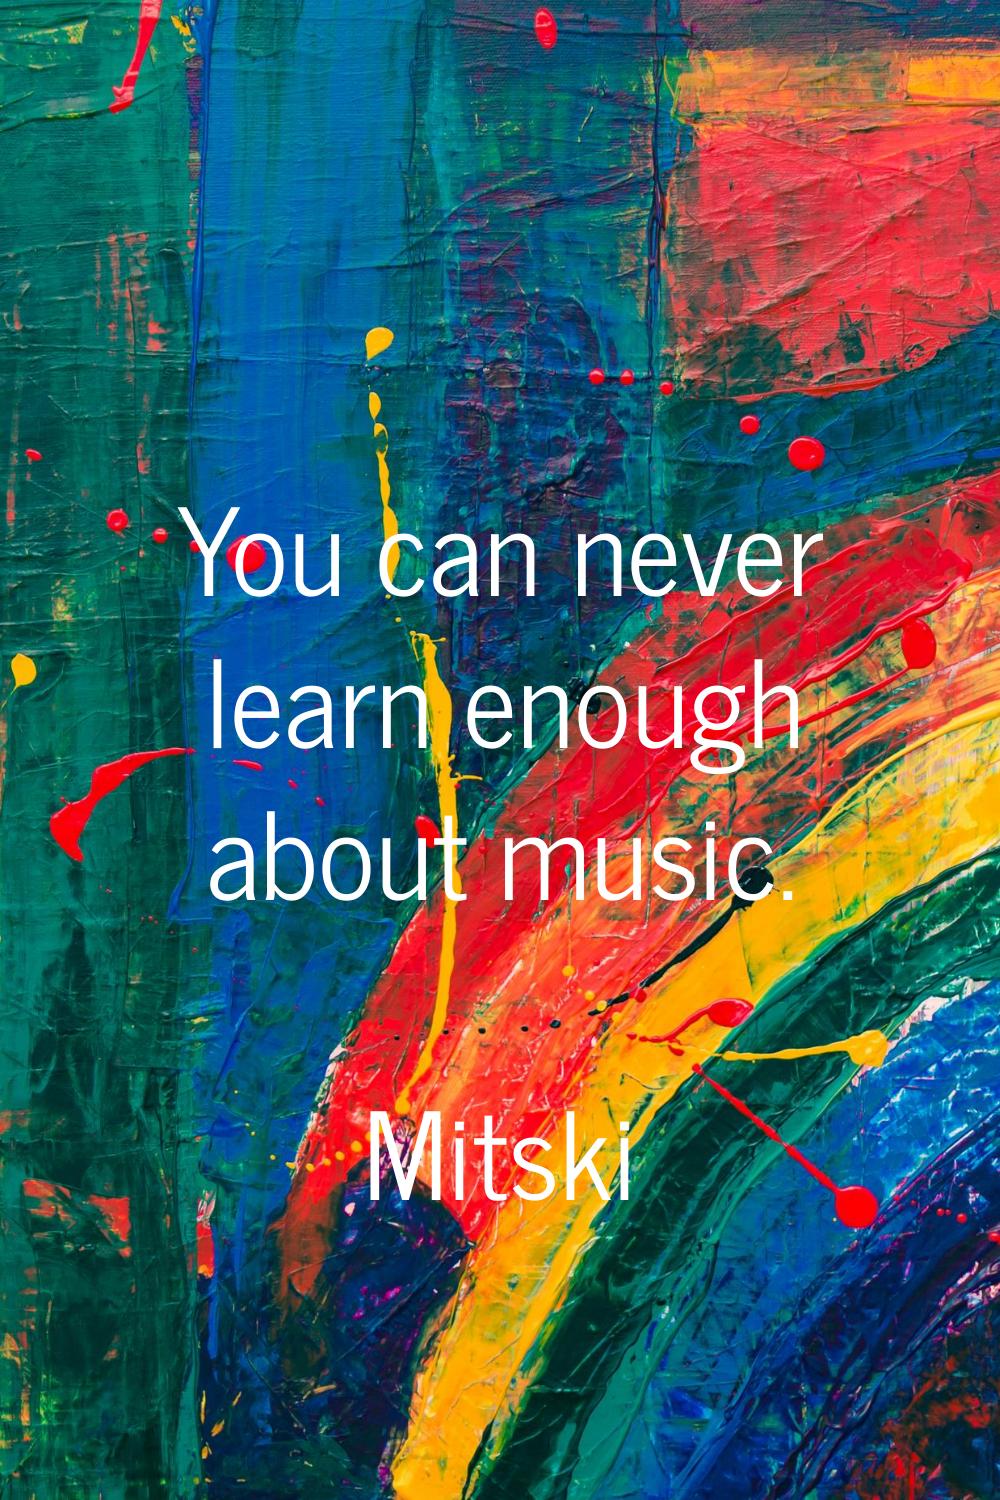 You can never learn enough about music.